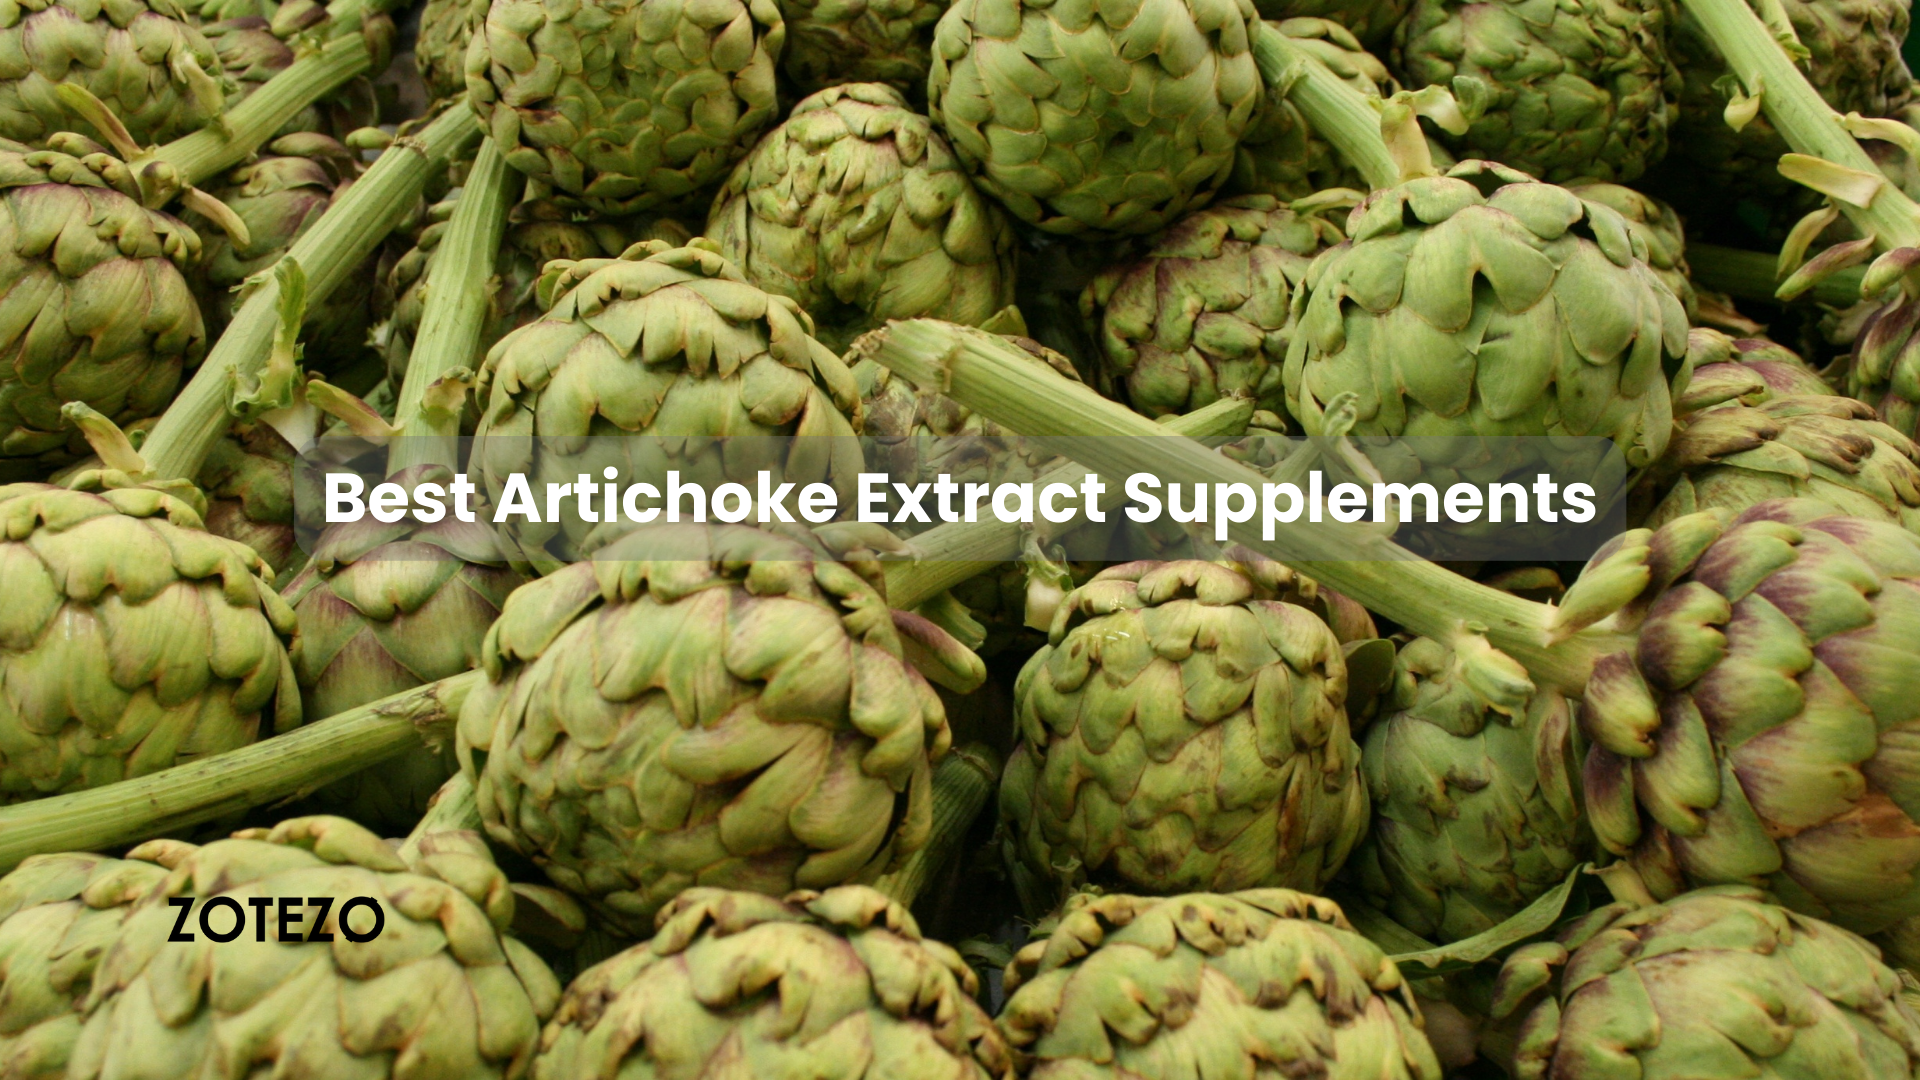 Artichoke Extract Supplements in Singapore